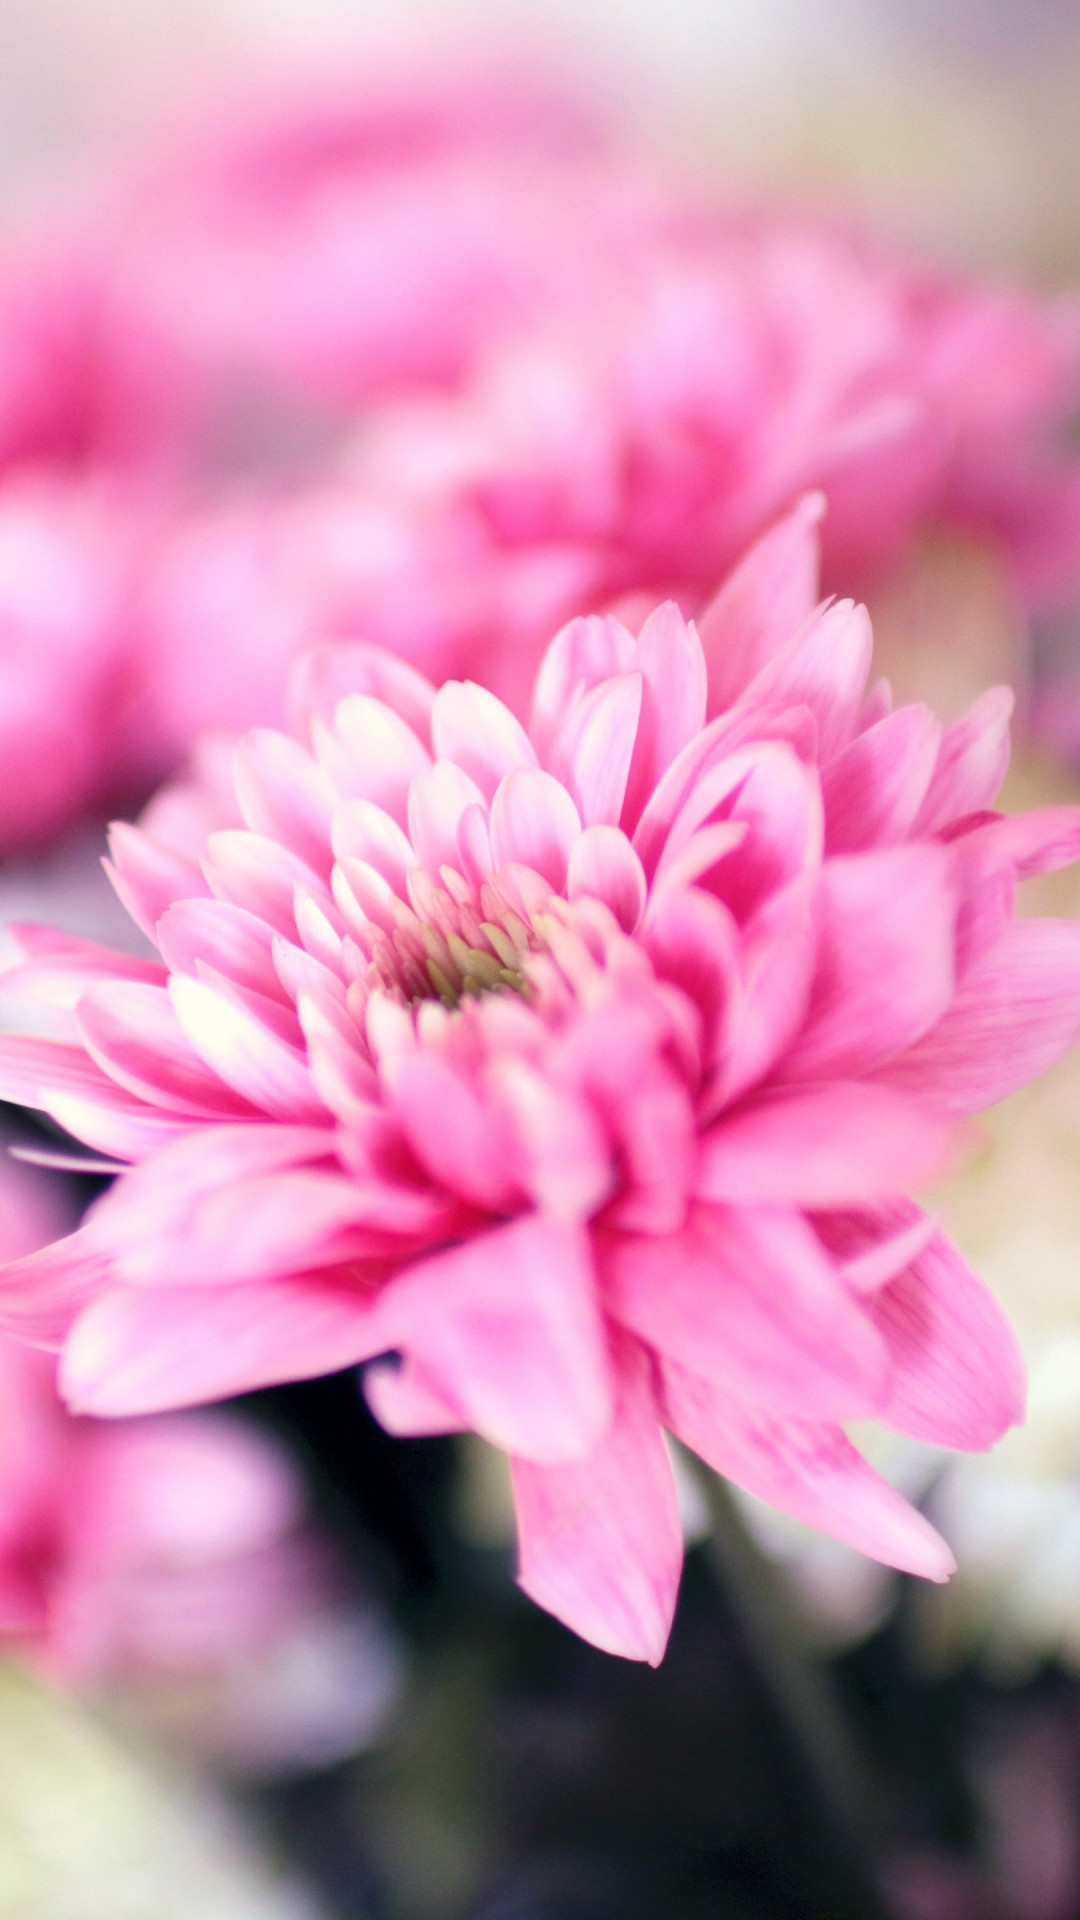 Pink and white flowers wallpaper 1080x1920